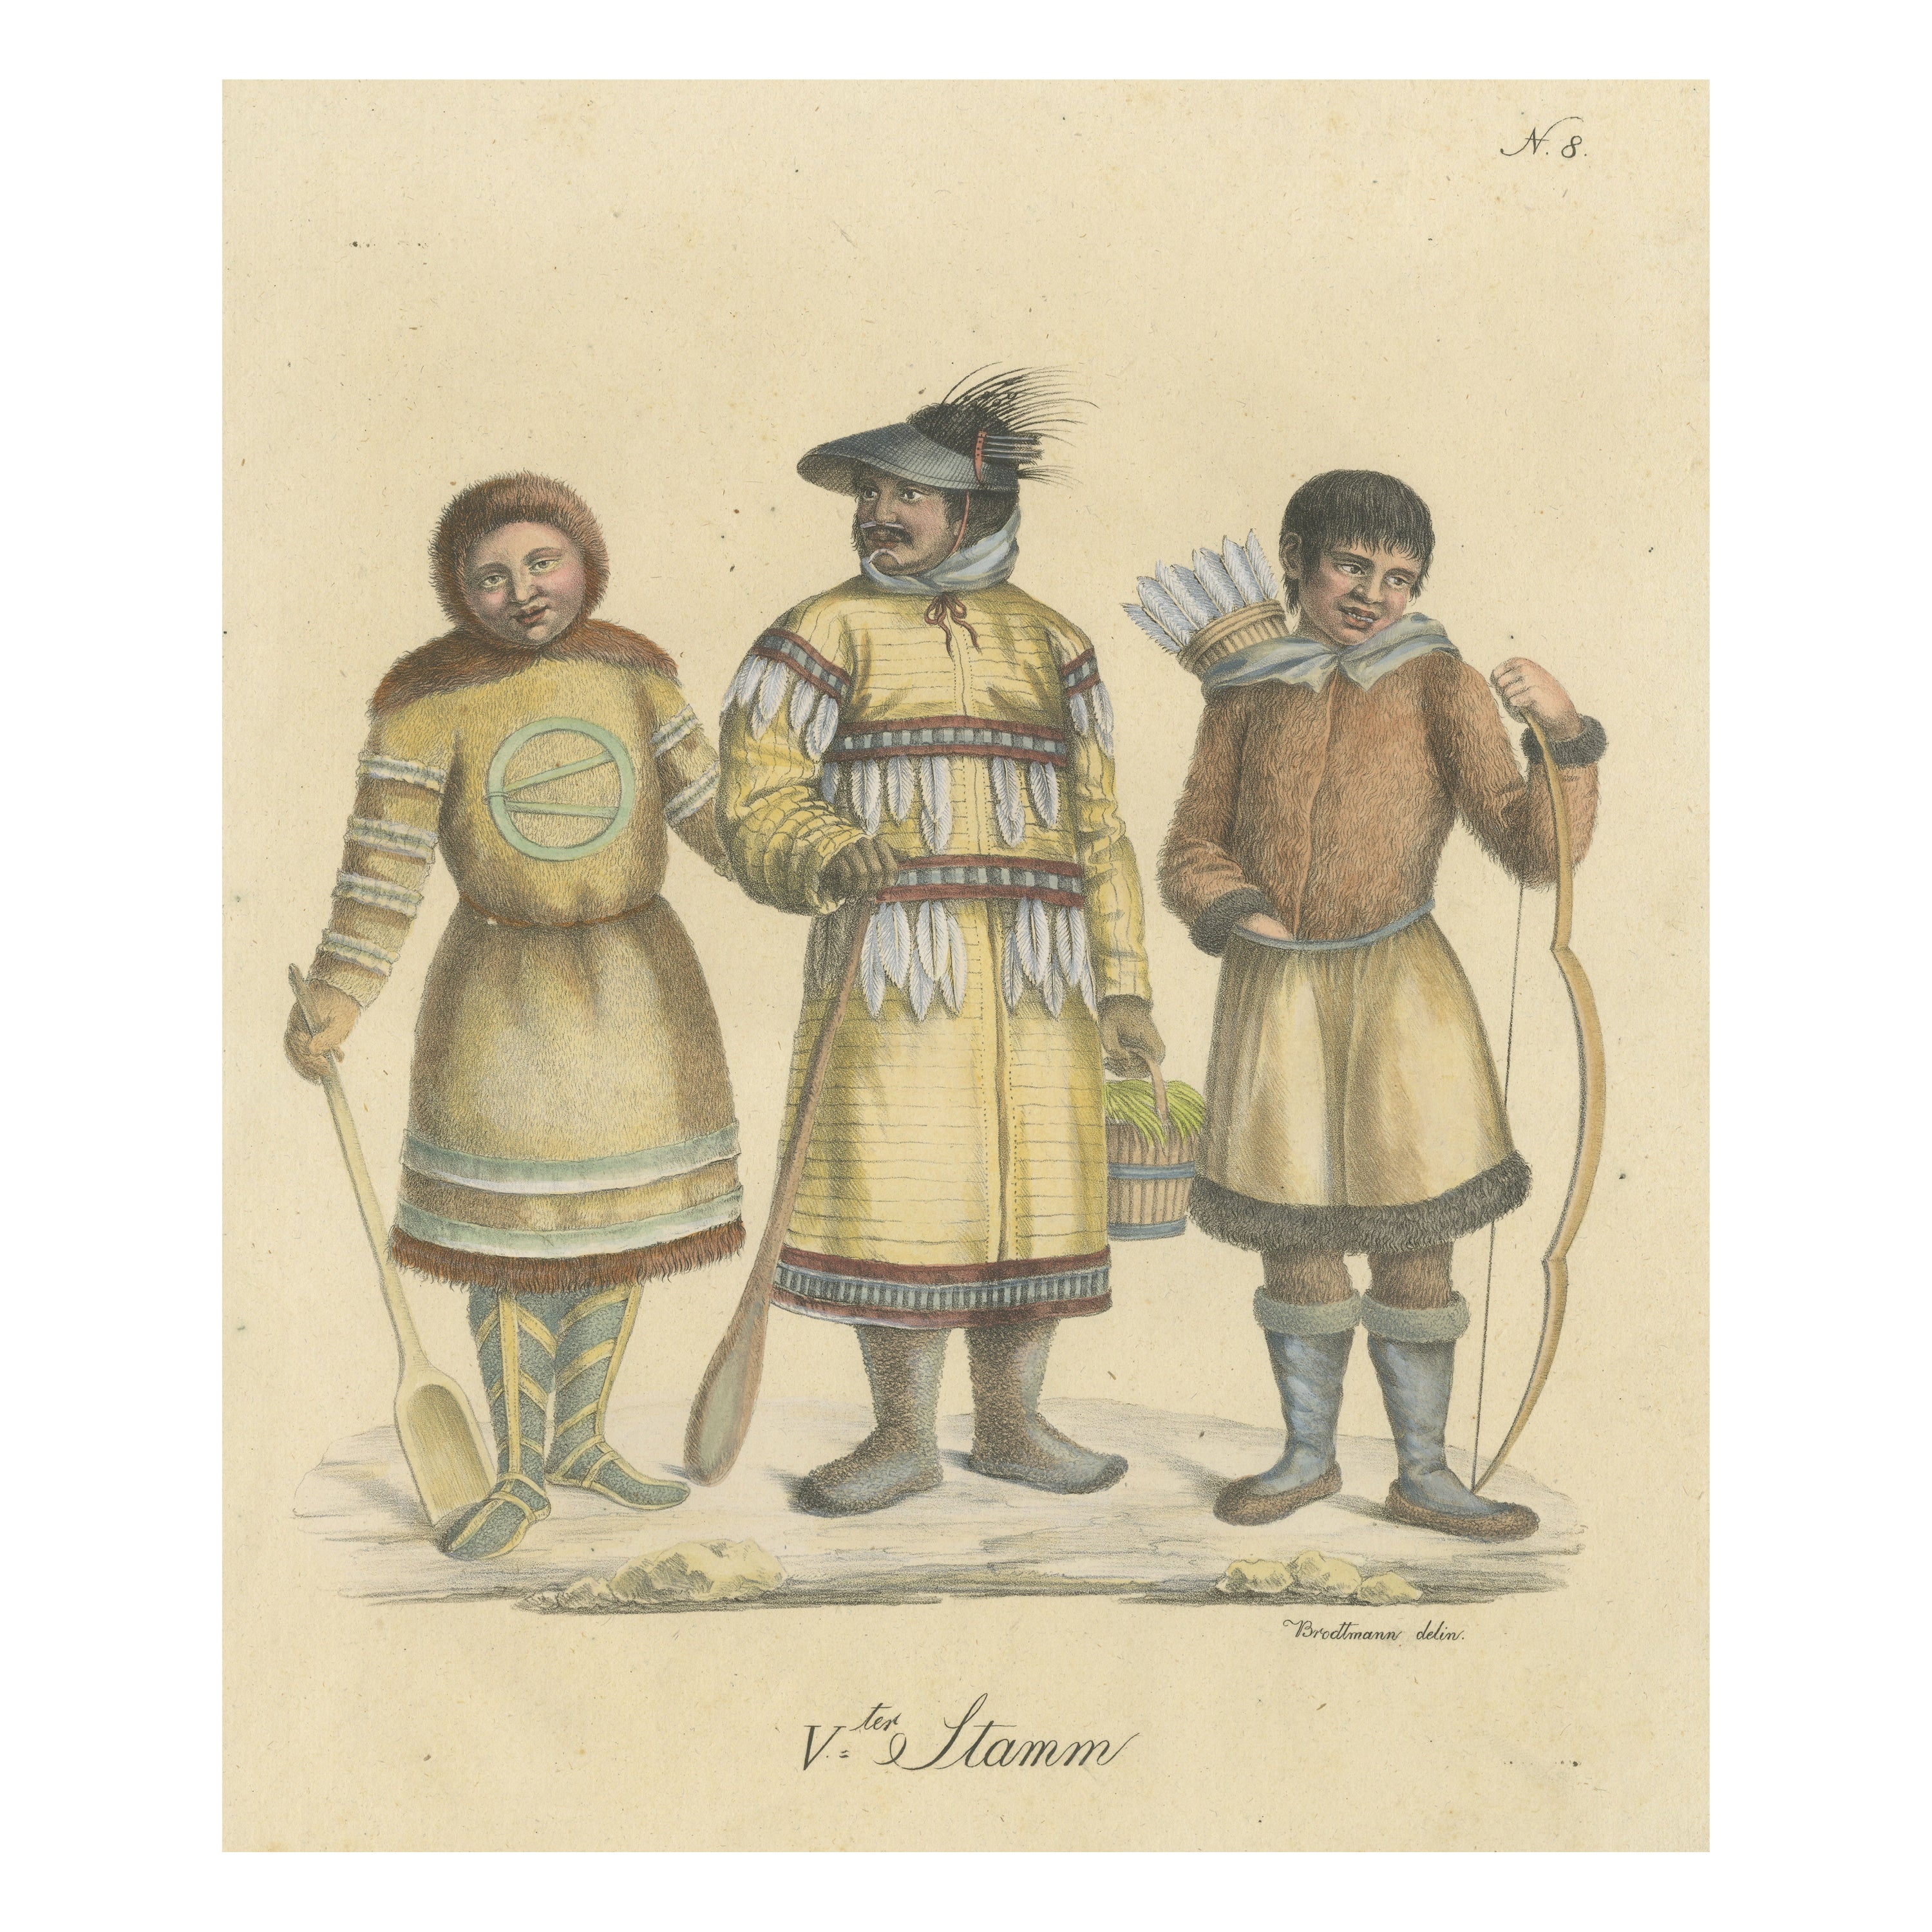 Antique Print of a Man from Unalaska, Nenet Woman and an Eskimo For Sale